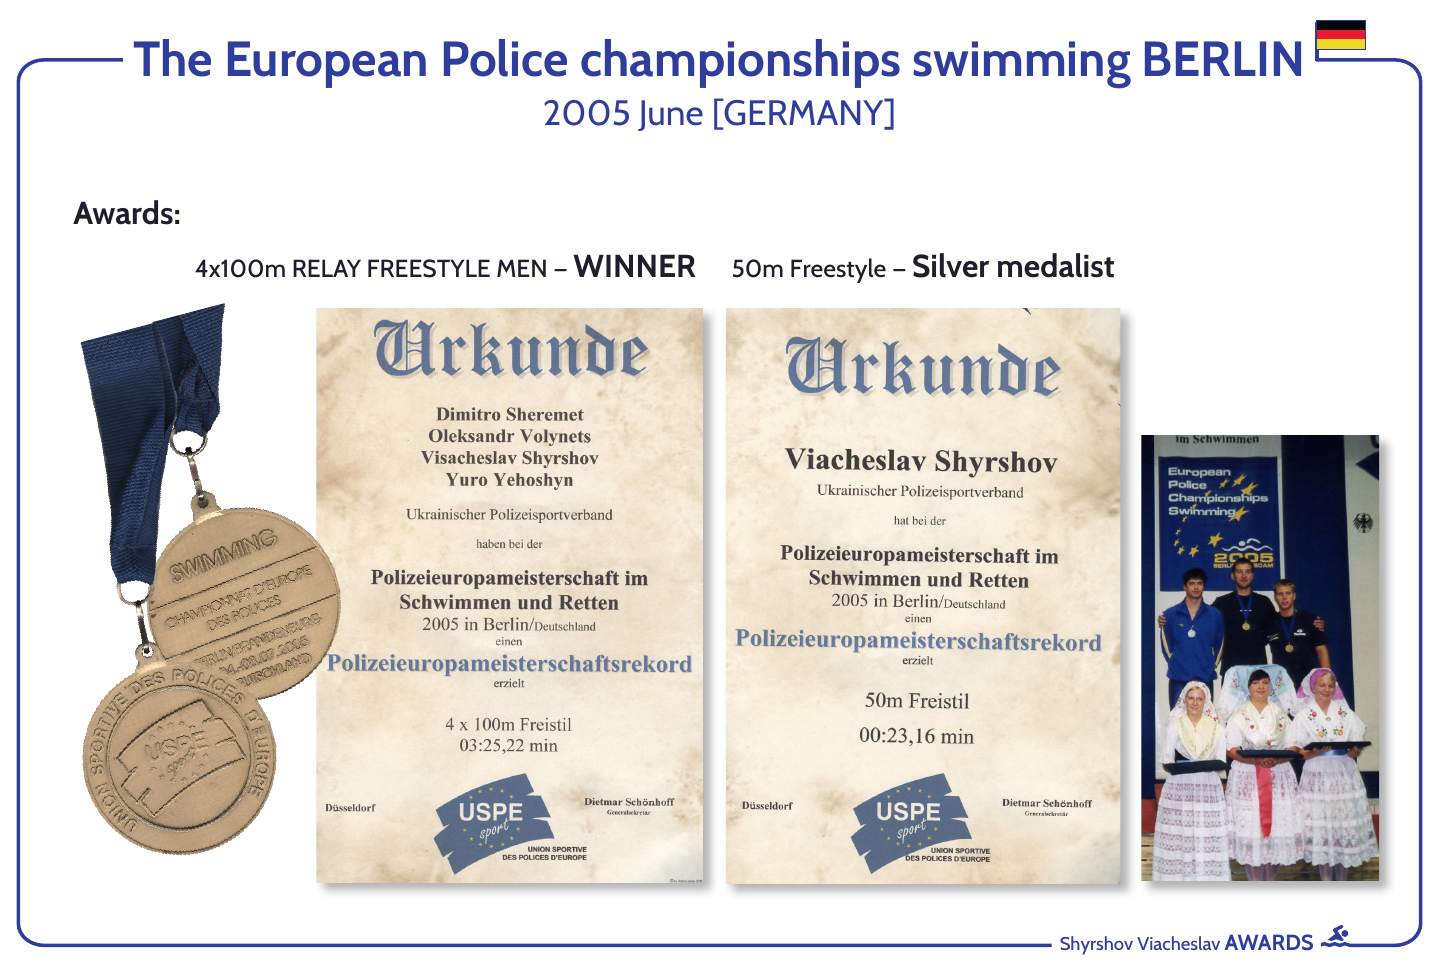 The European Police championships swimming BERLIN 2005